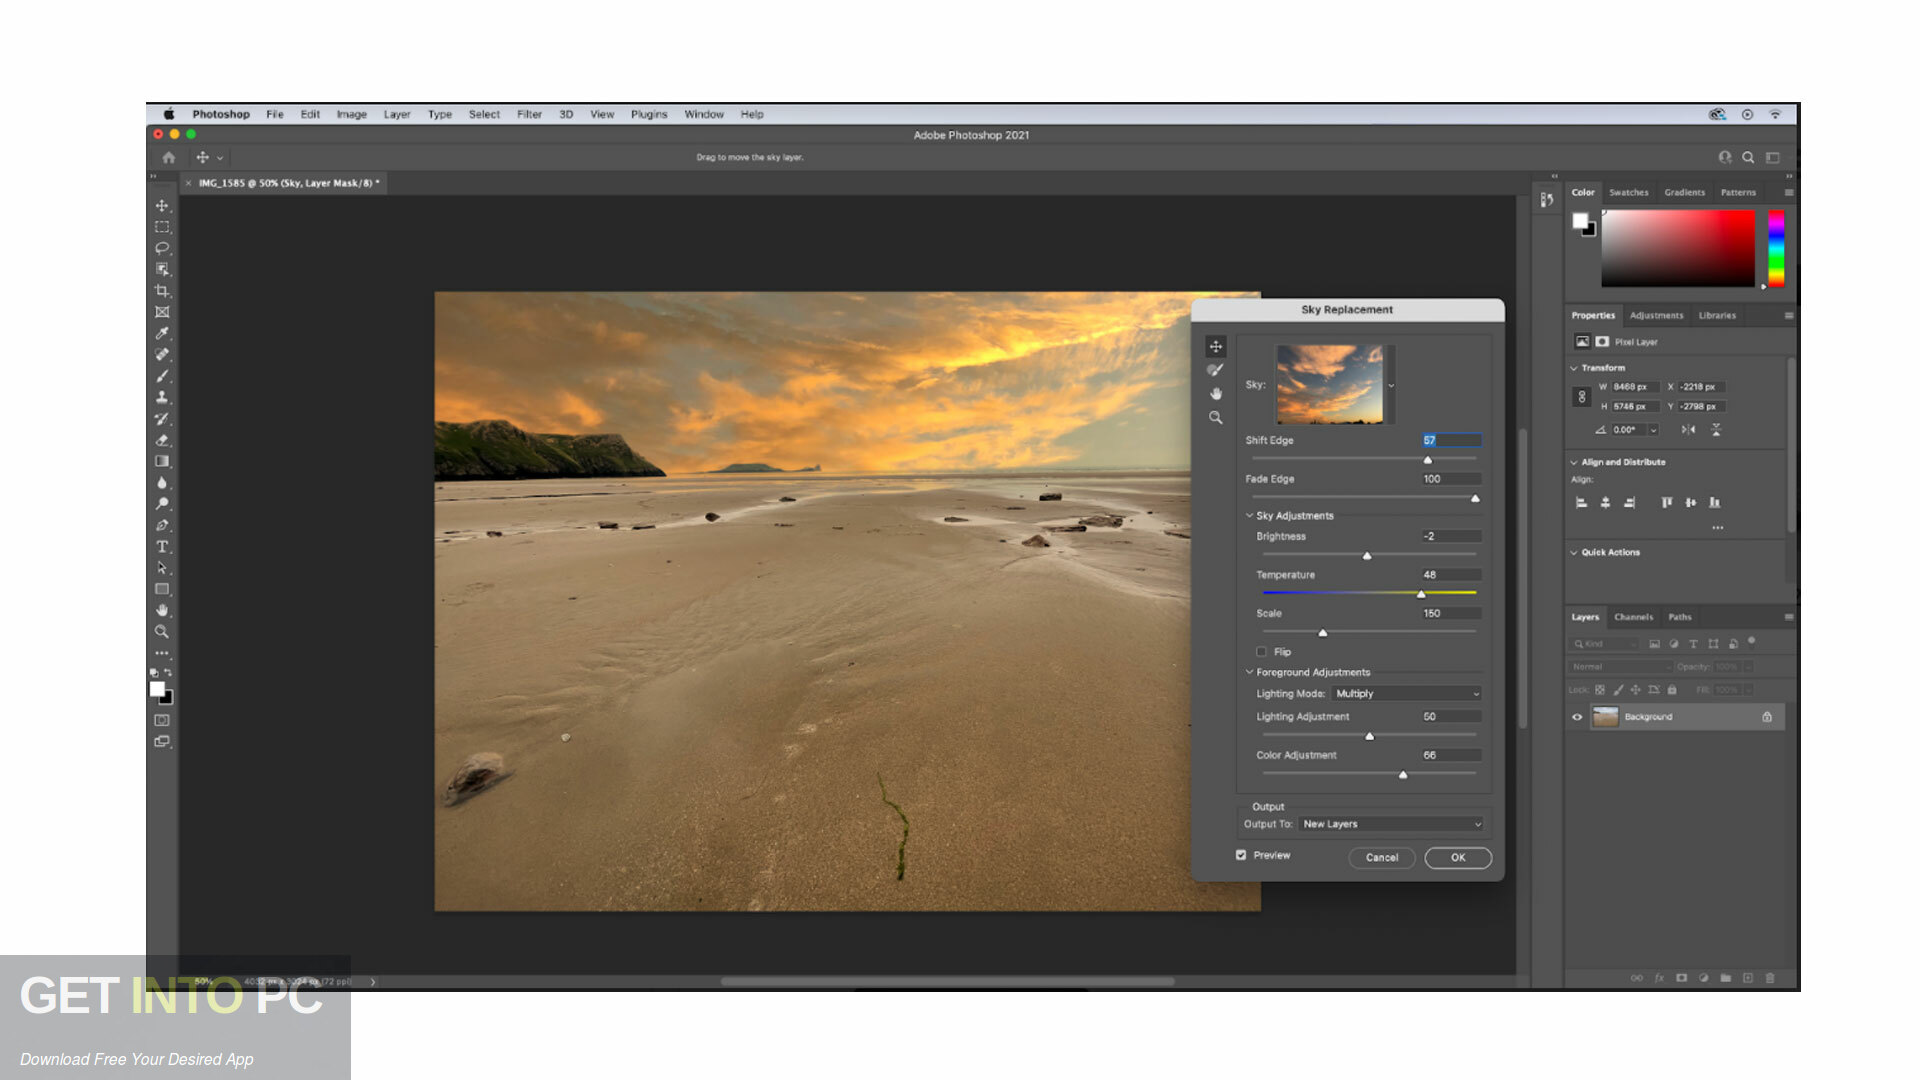 adobe photoshop 2023 free download for windows 11